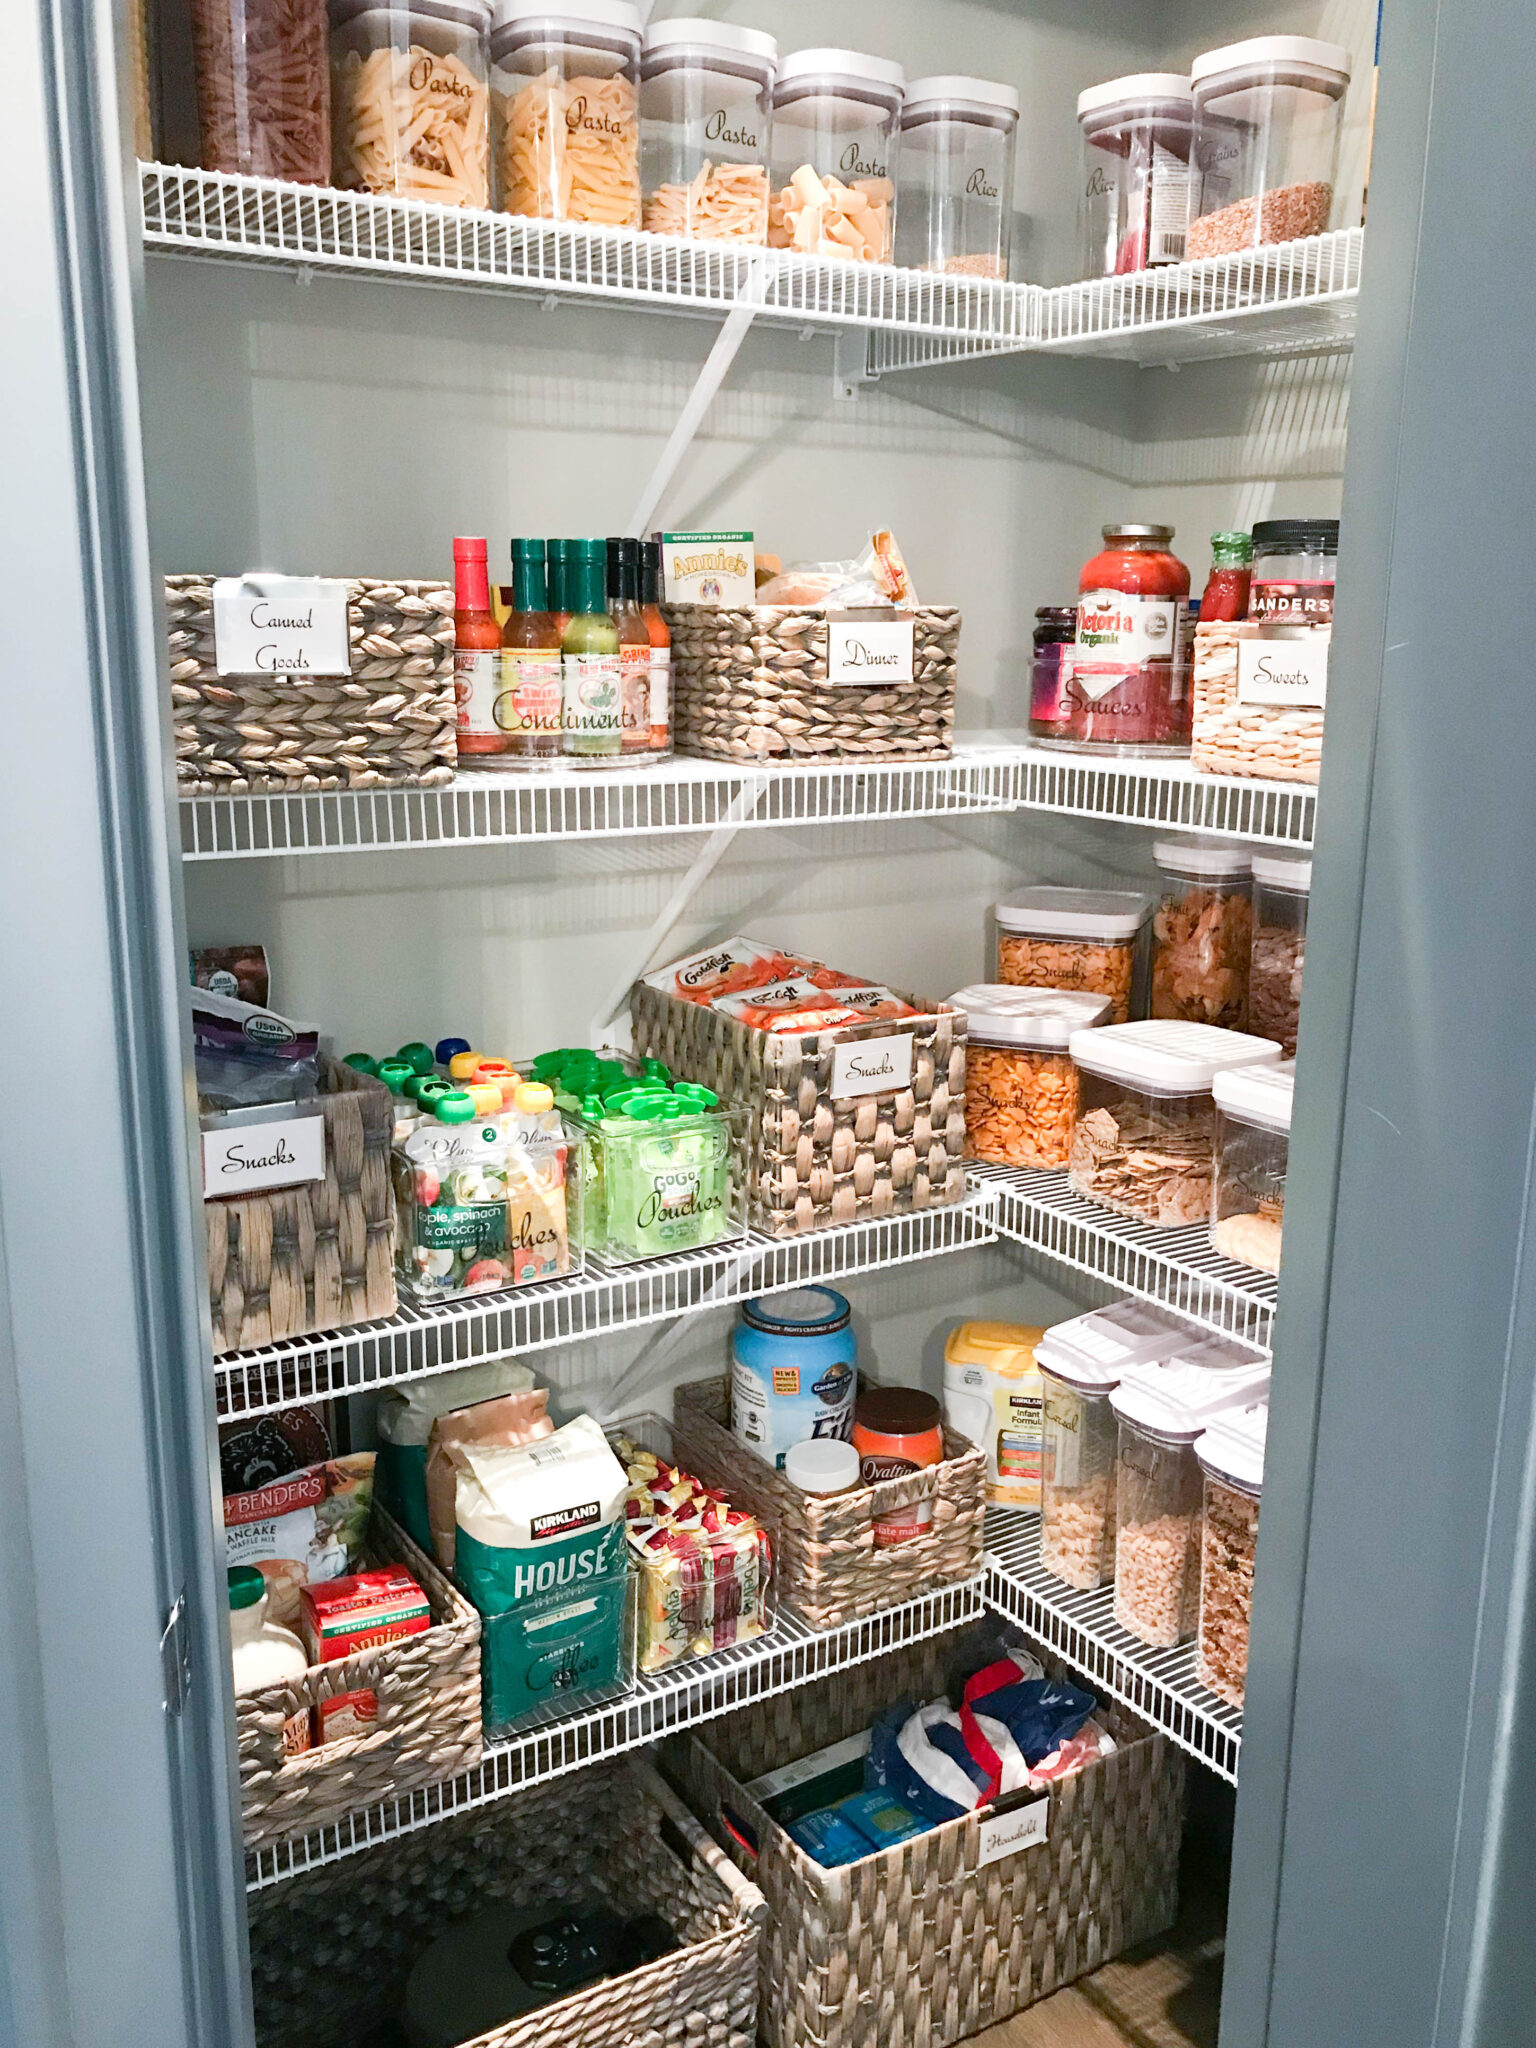 https://paisleyandsparrow.com/wp-content/uploads/2018/08/how-to-organize-your-kitchen-pantry-with-style-and-dwell-16-of-16.jpg